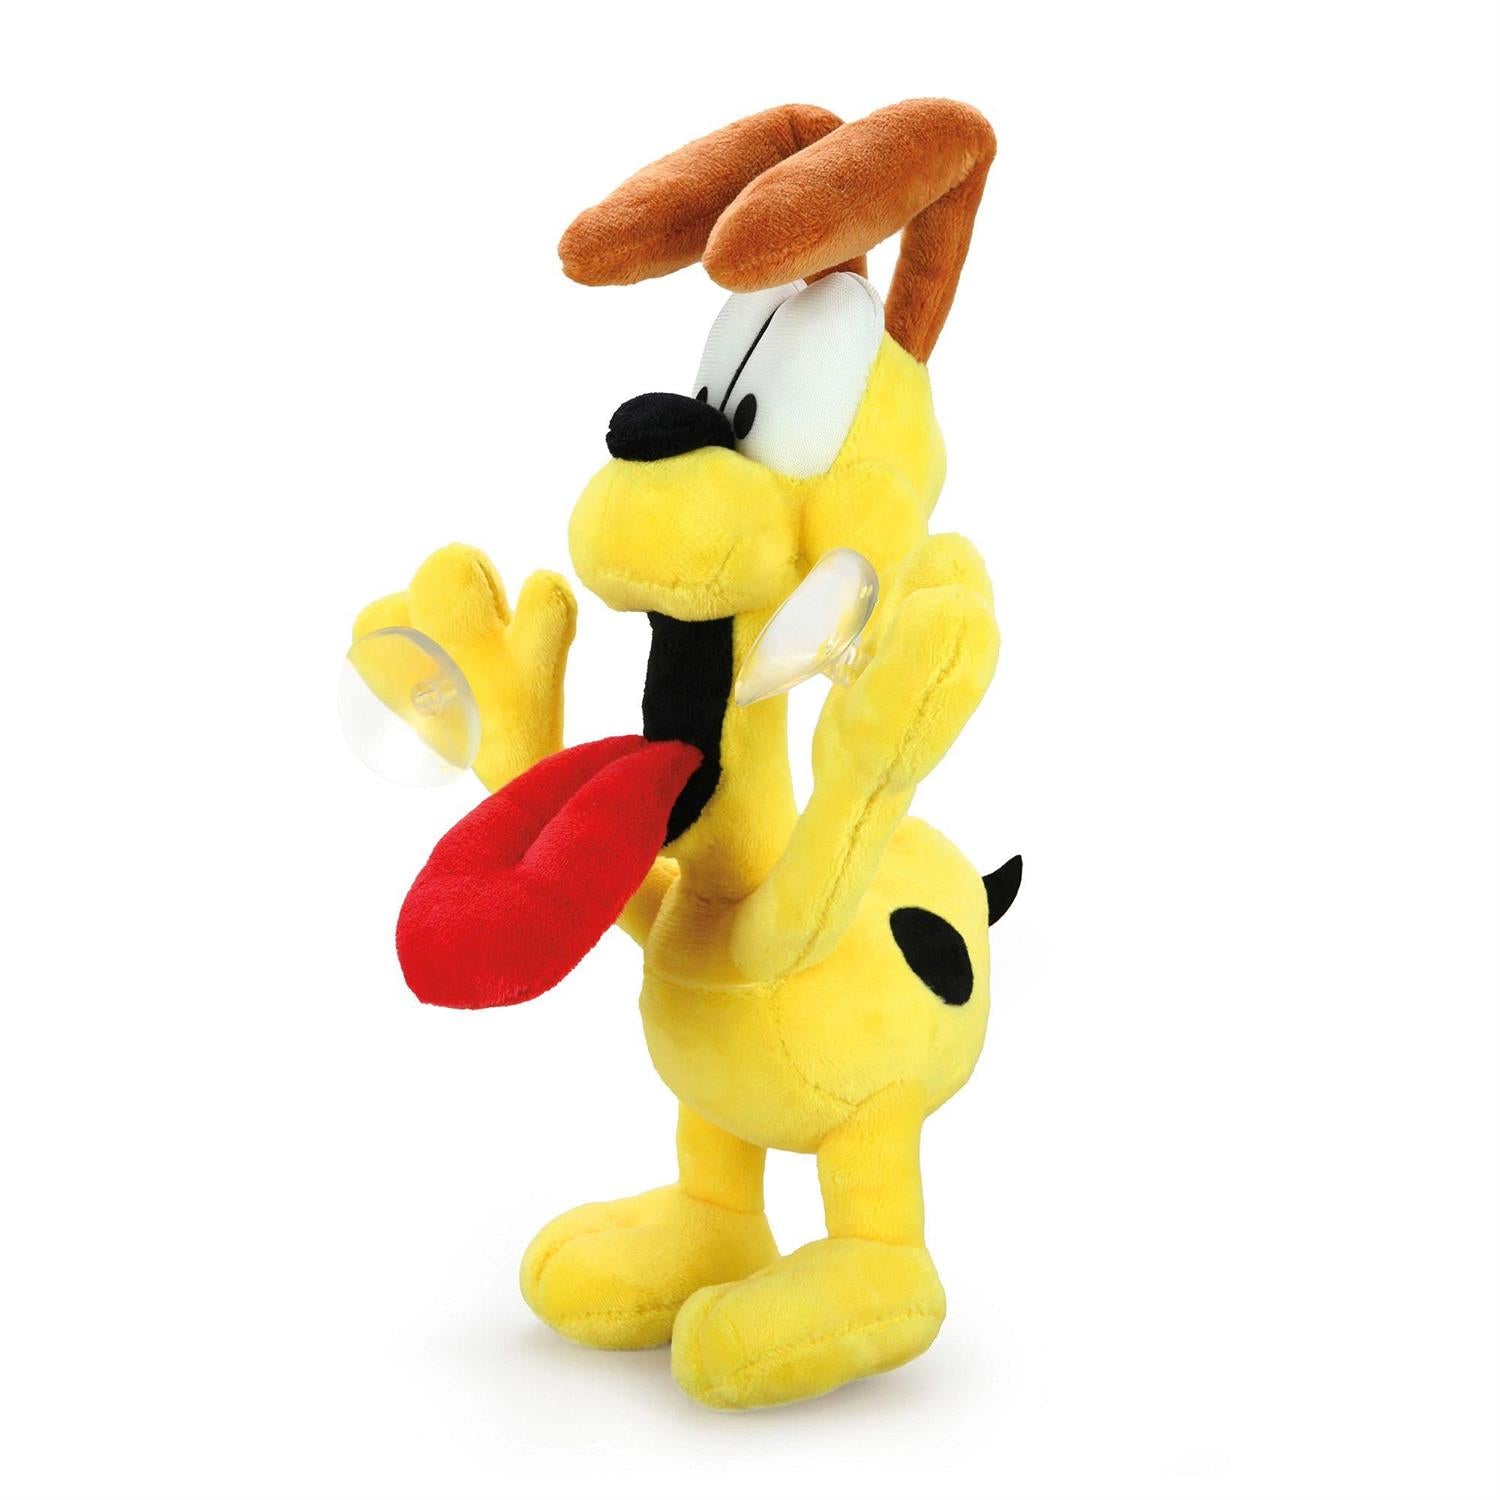 Odie 8" Plush w/Suction Cups